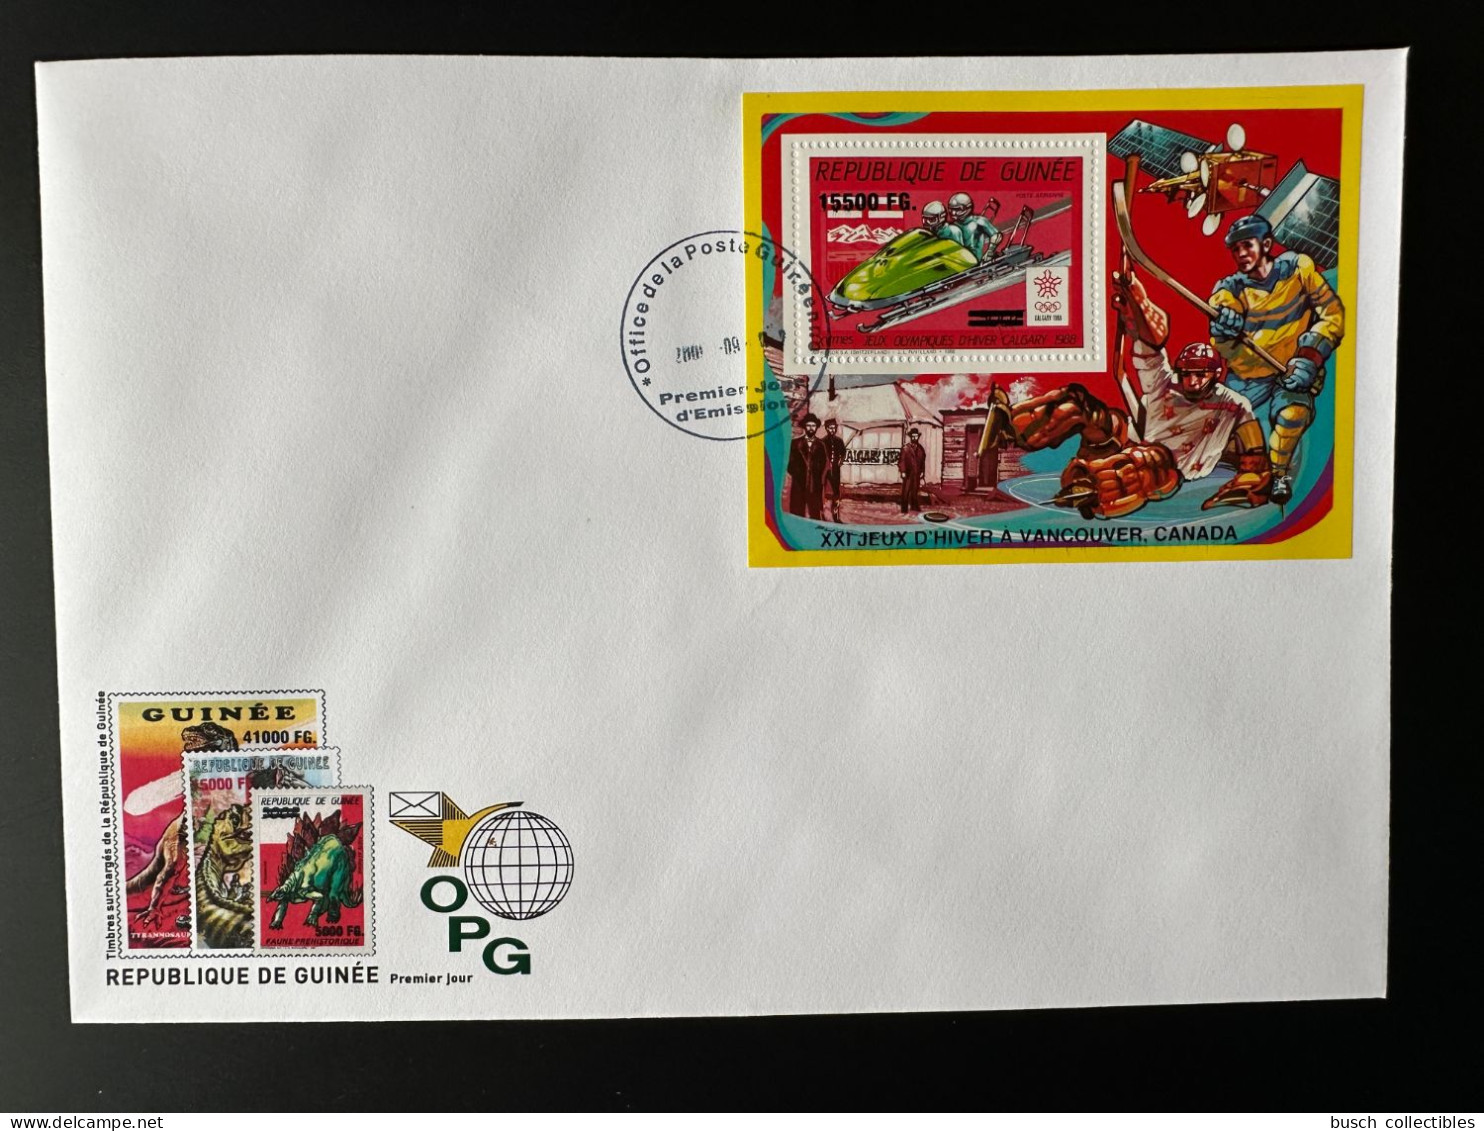 Guinée Guinea 2009 FDC Mi. Bl. 1727 Surch Overprint Winter Olympic Calgary 1988 Vancouver 2010 Jeux Olympiques Bobsleigh - Winter 1988: Calgary